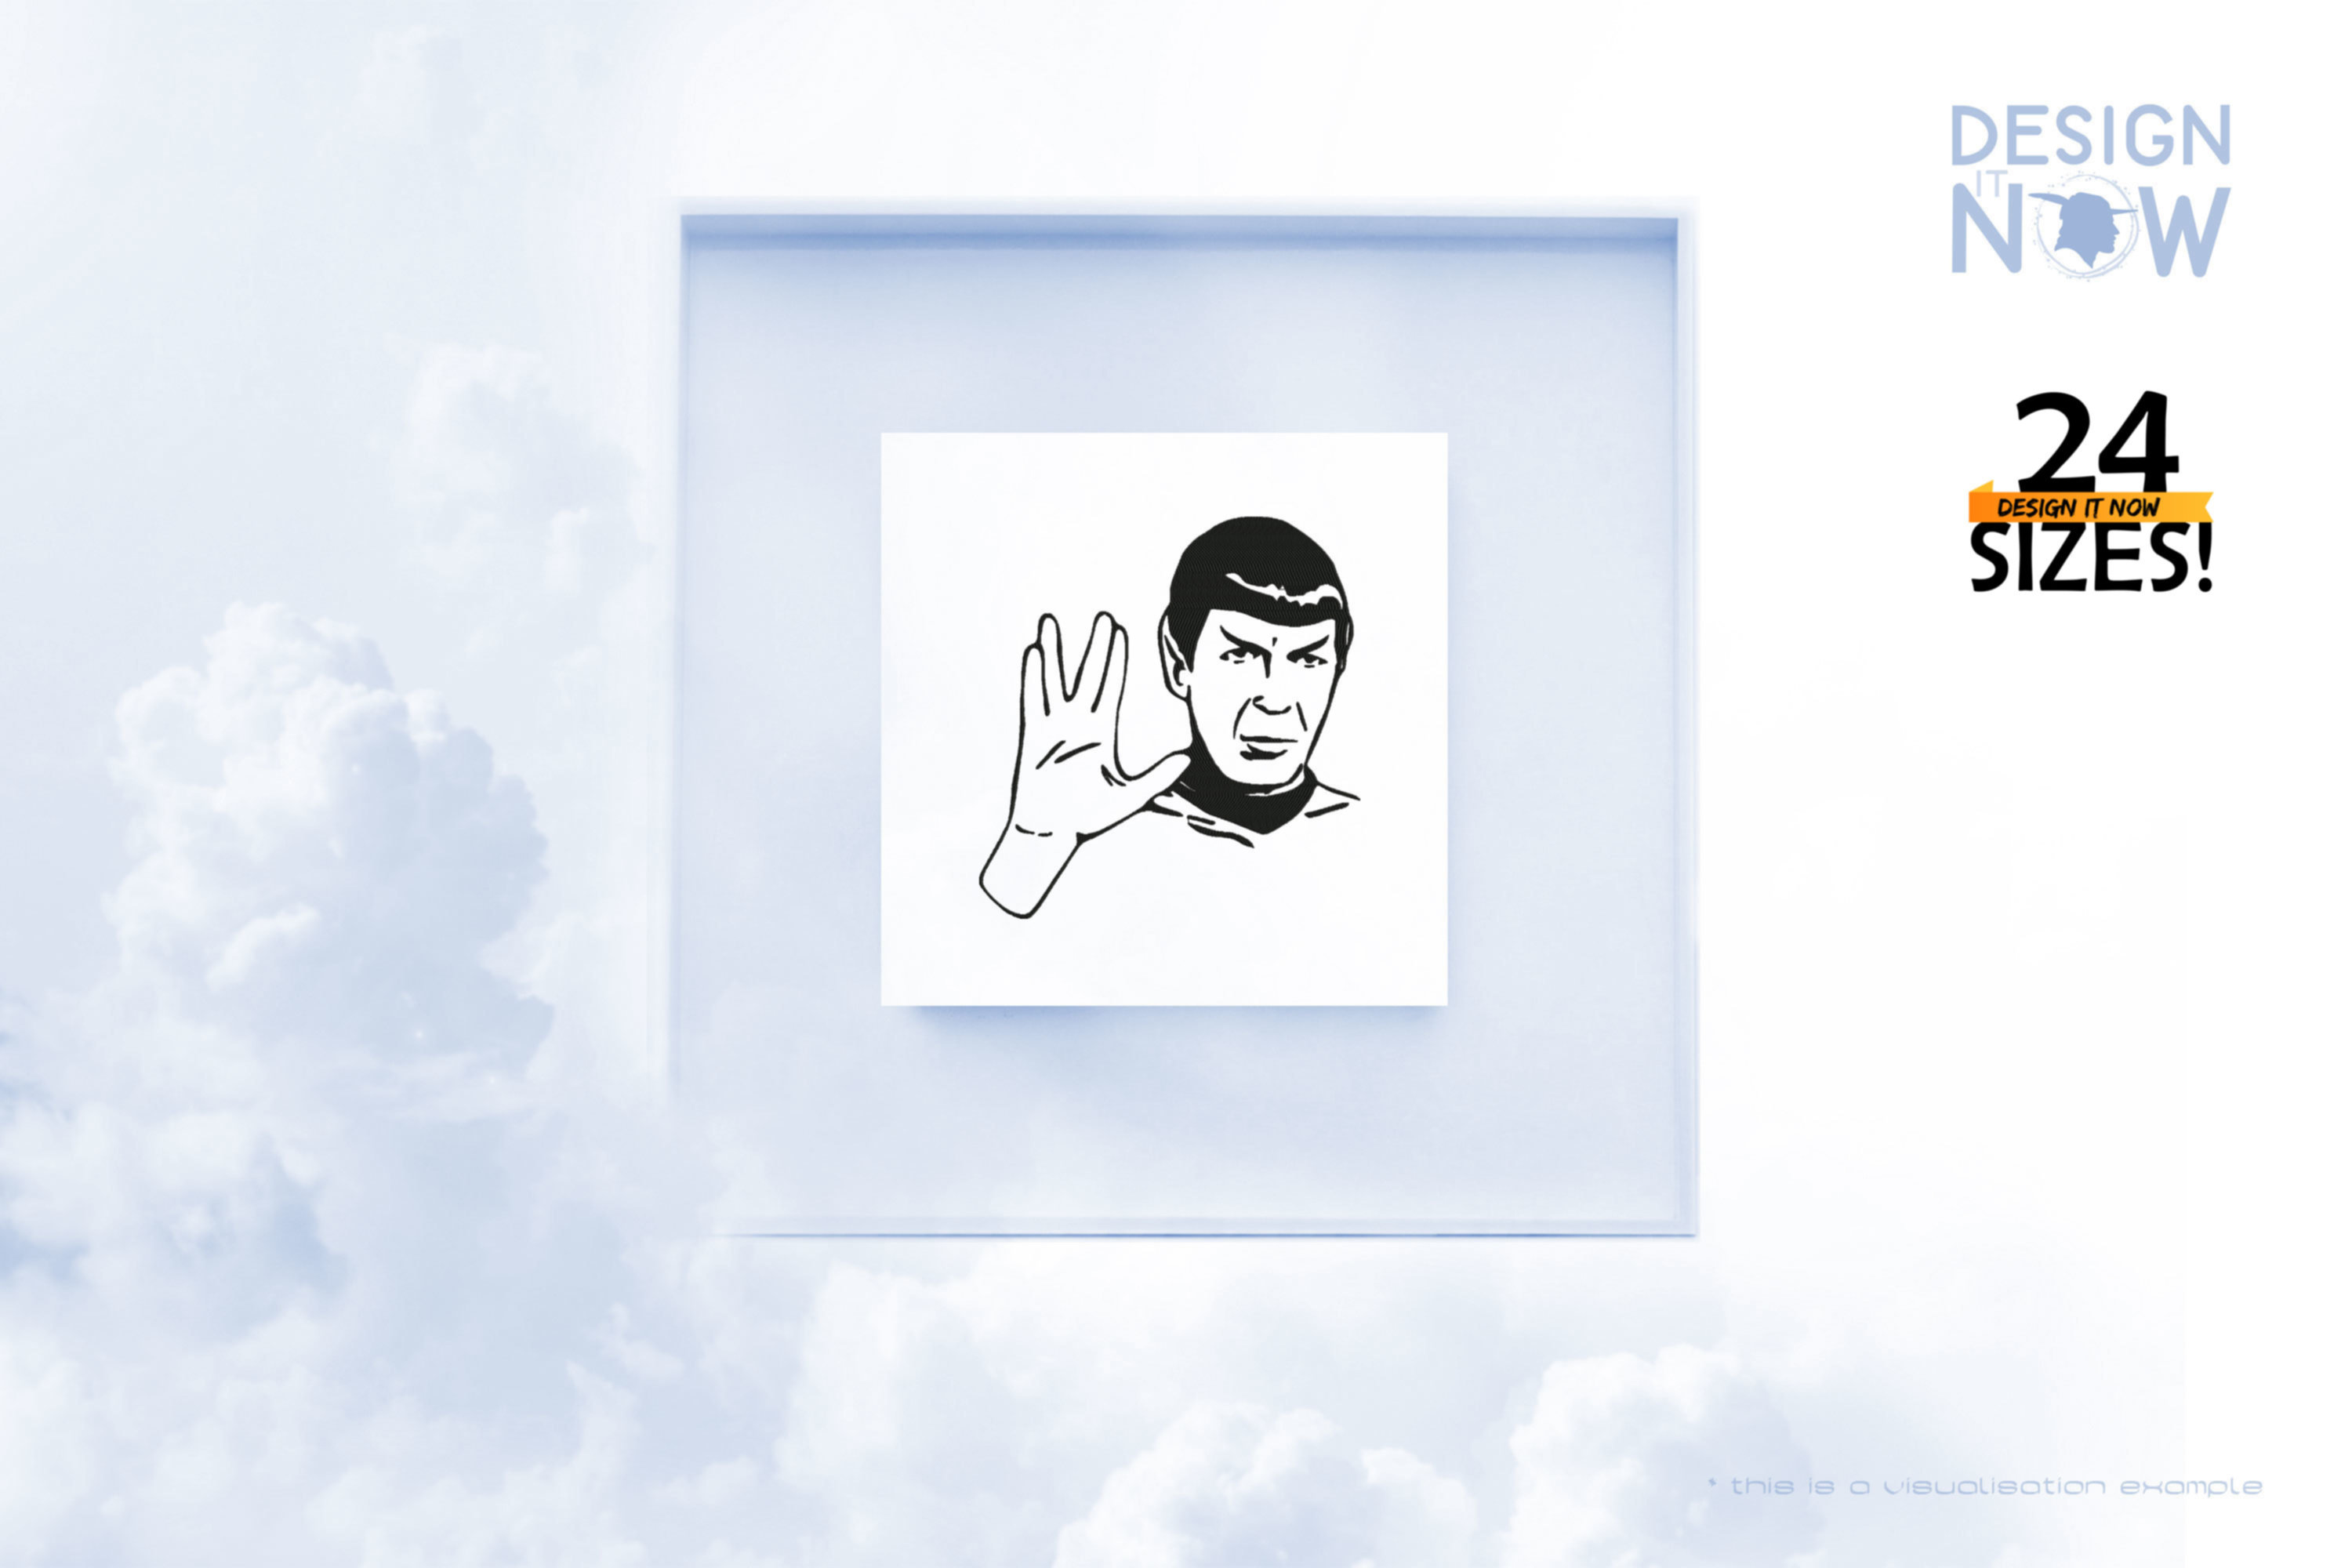 Tribut To Fictional Character Spock aka Spock